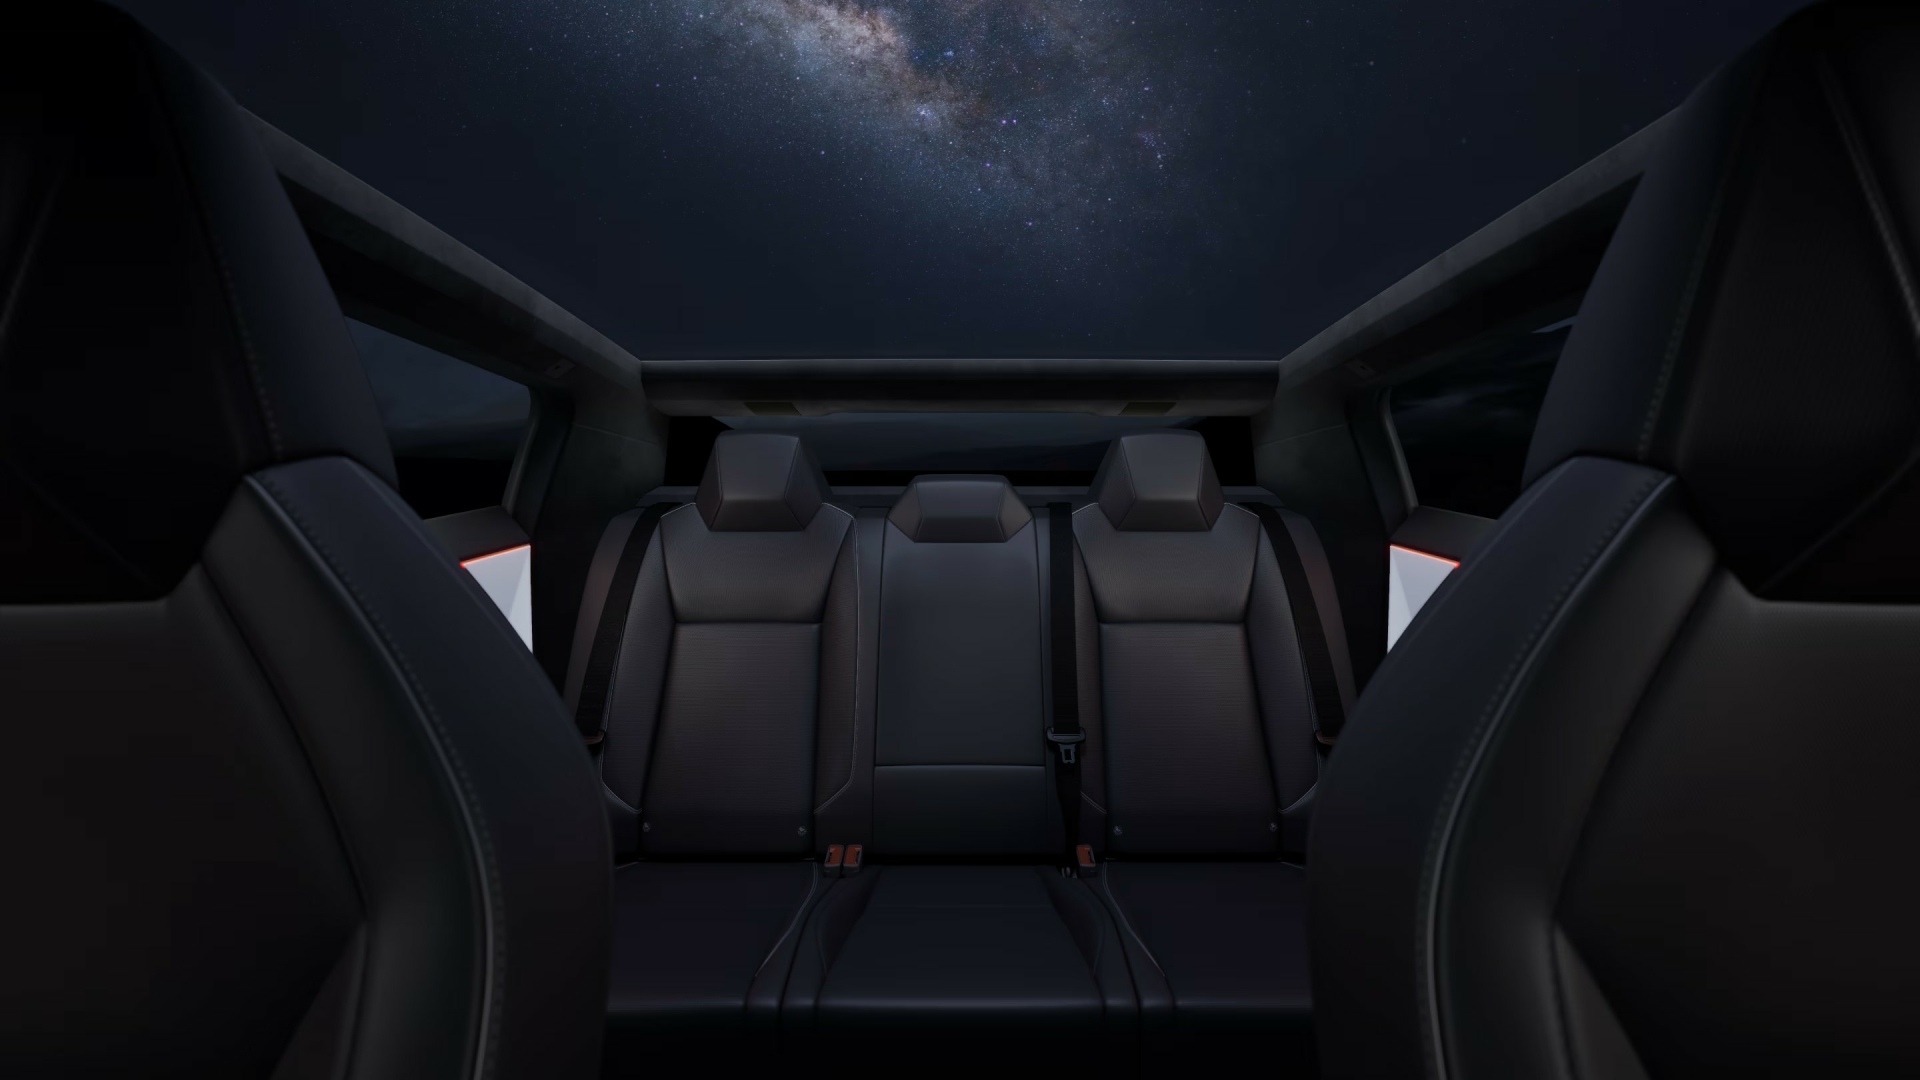 Rear Seating Layout Of The Tesla Cyber Truck (Credits Tesla)